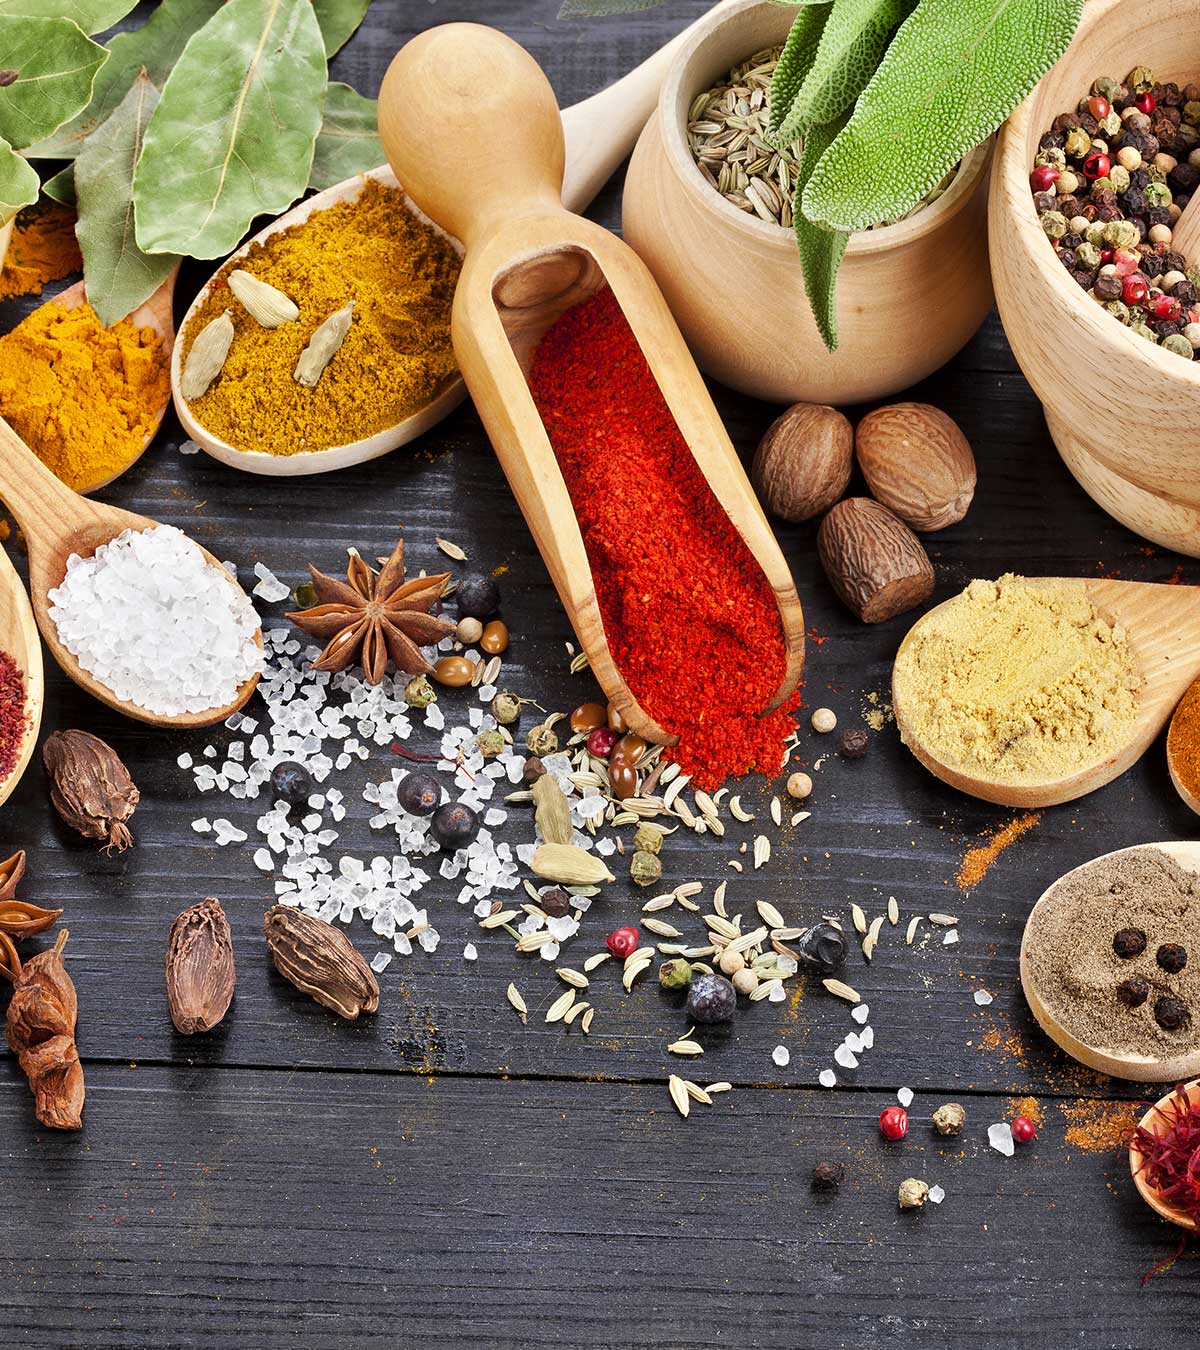 Top 10 Spices To Eat & Avoid During Pregnancy